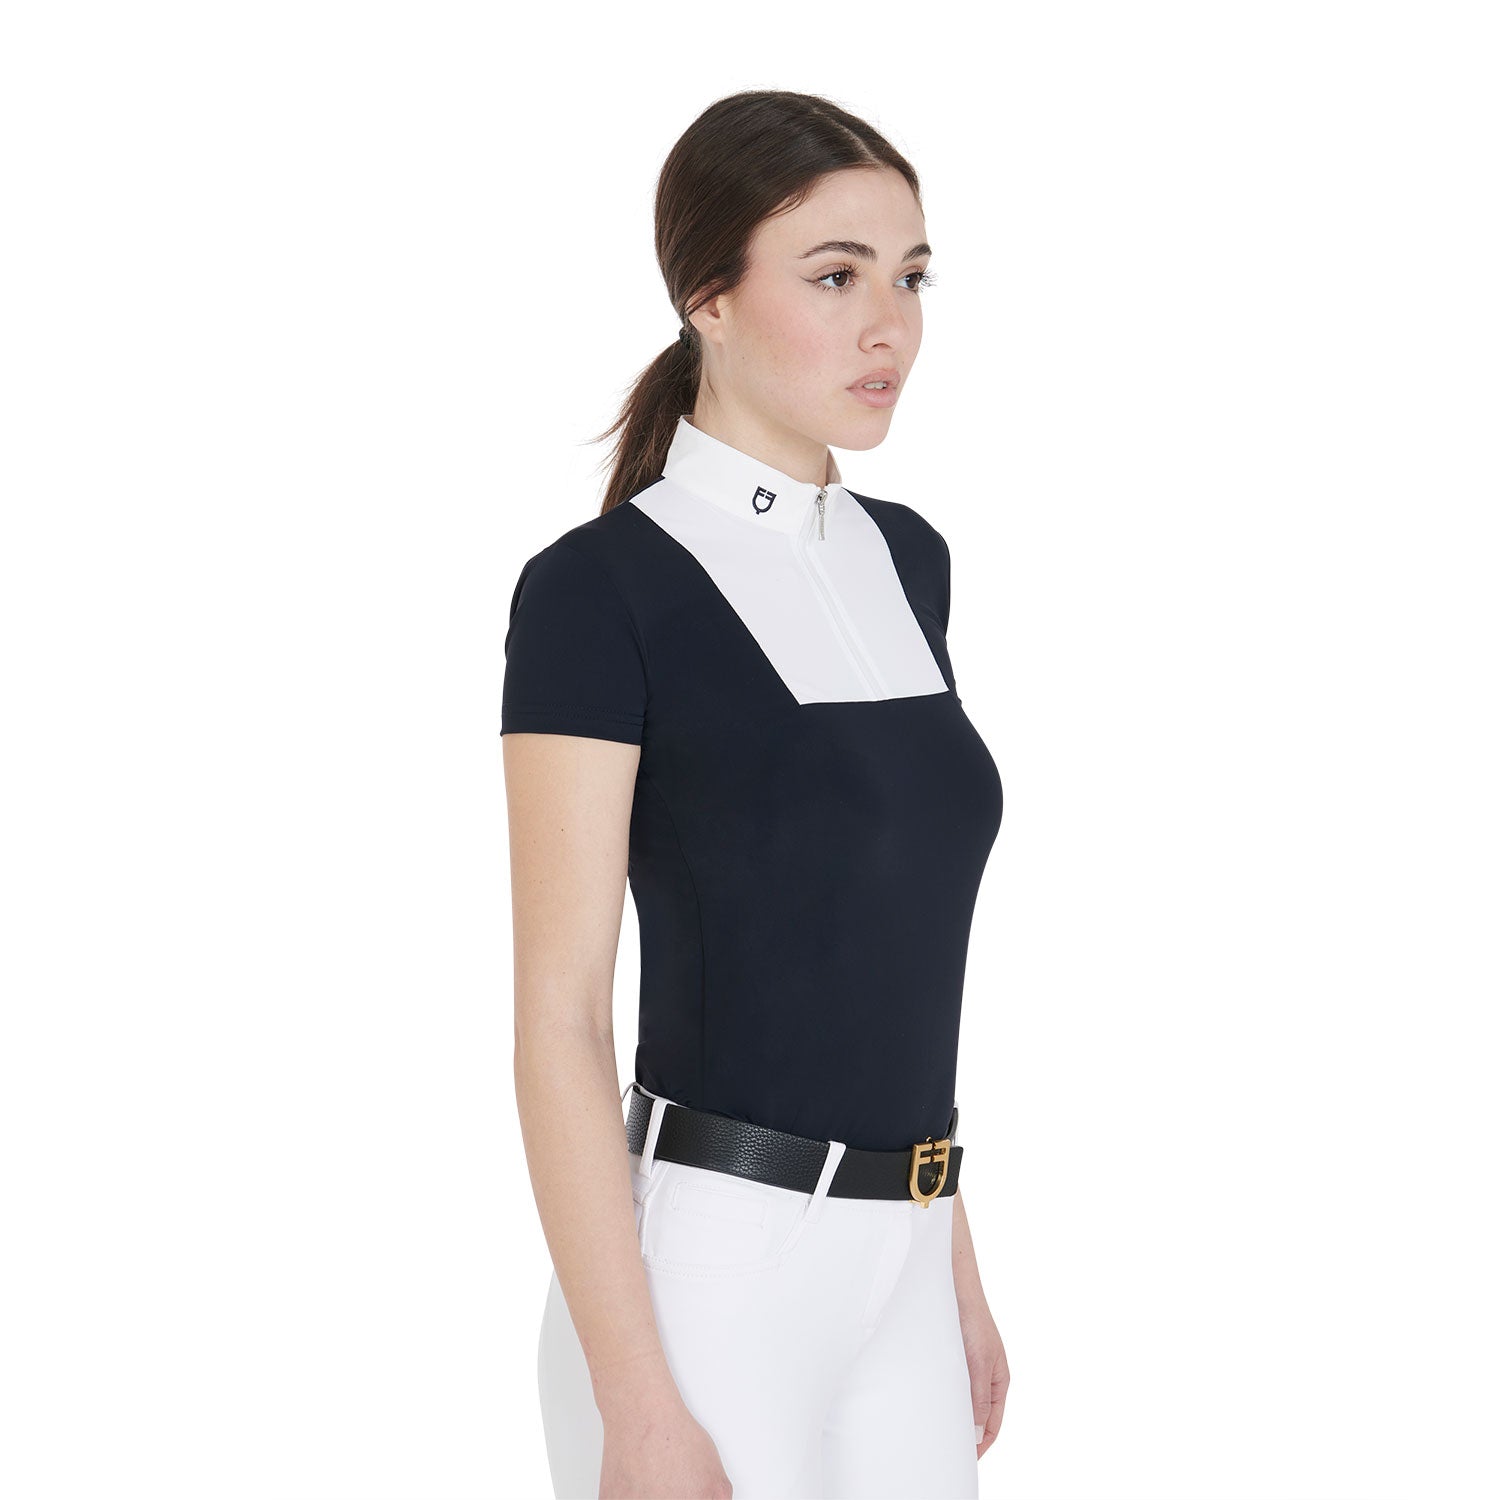 Equestro Women's Short Sleeve Slim Fit Competition Polo Shirt